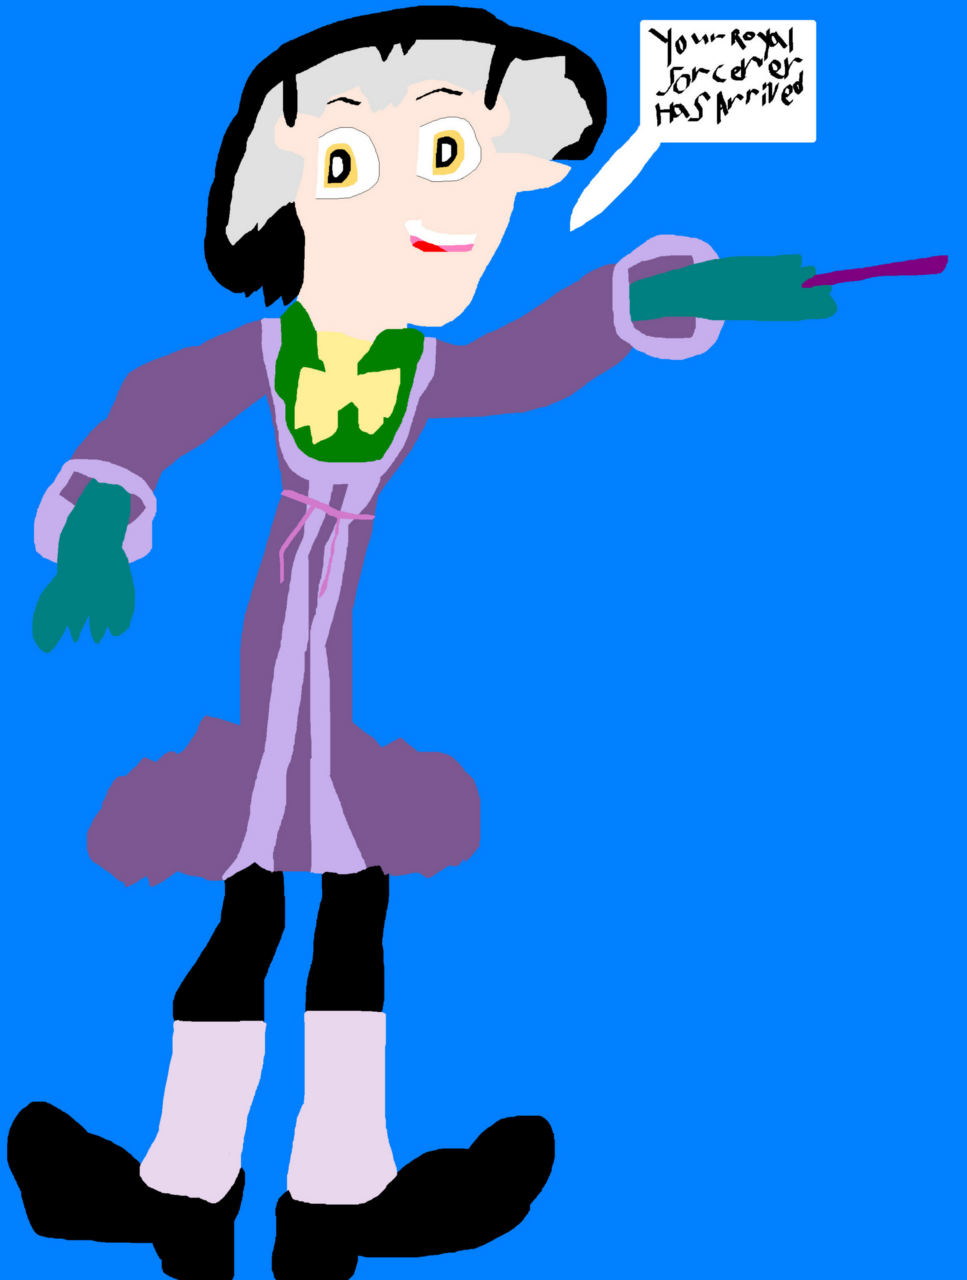 Your Royal Sorcerer Has Arrived MS Paint^^ by Falconlobo